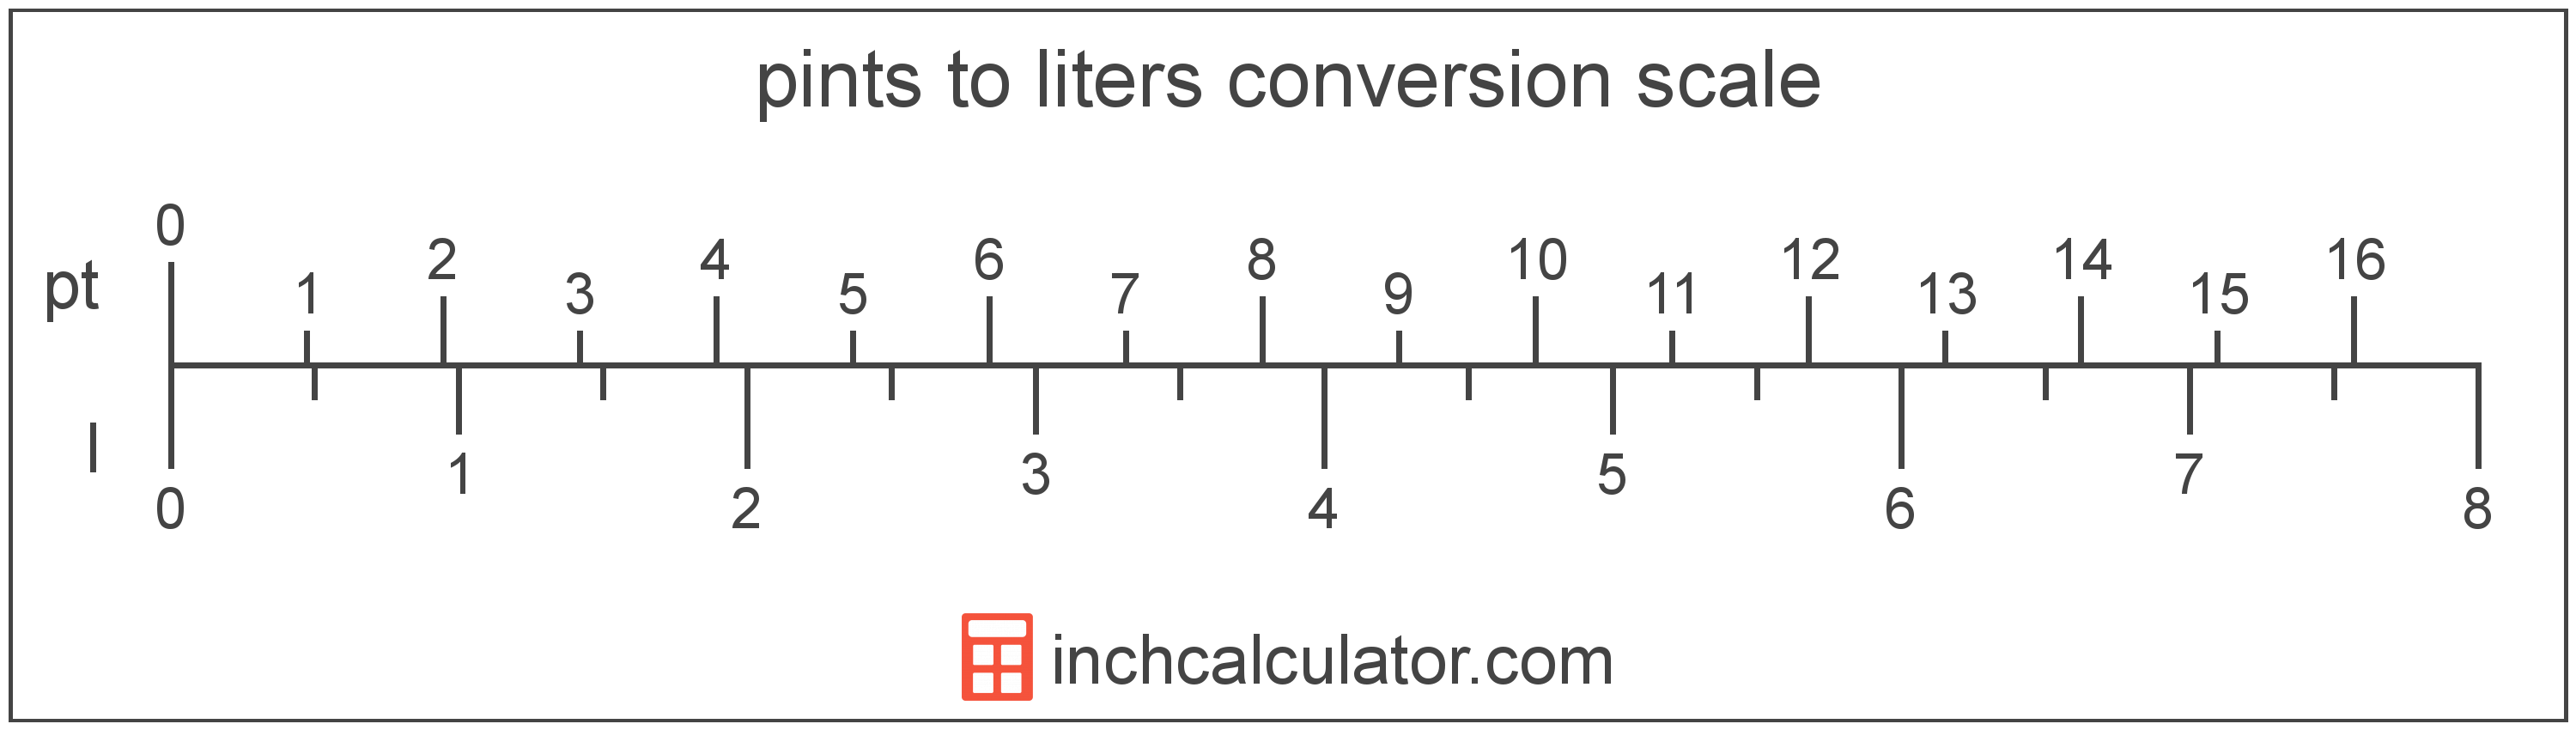 conversion scale showing liters and equivalent pints volume values